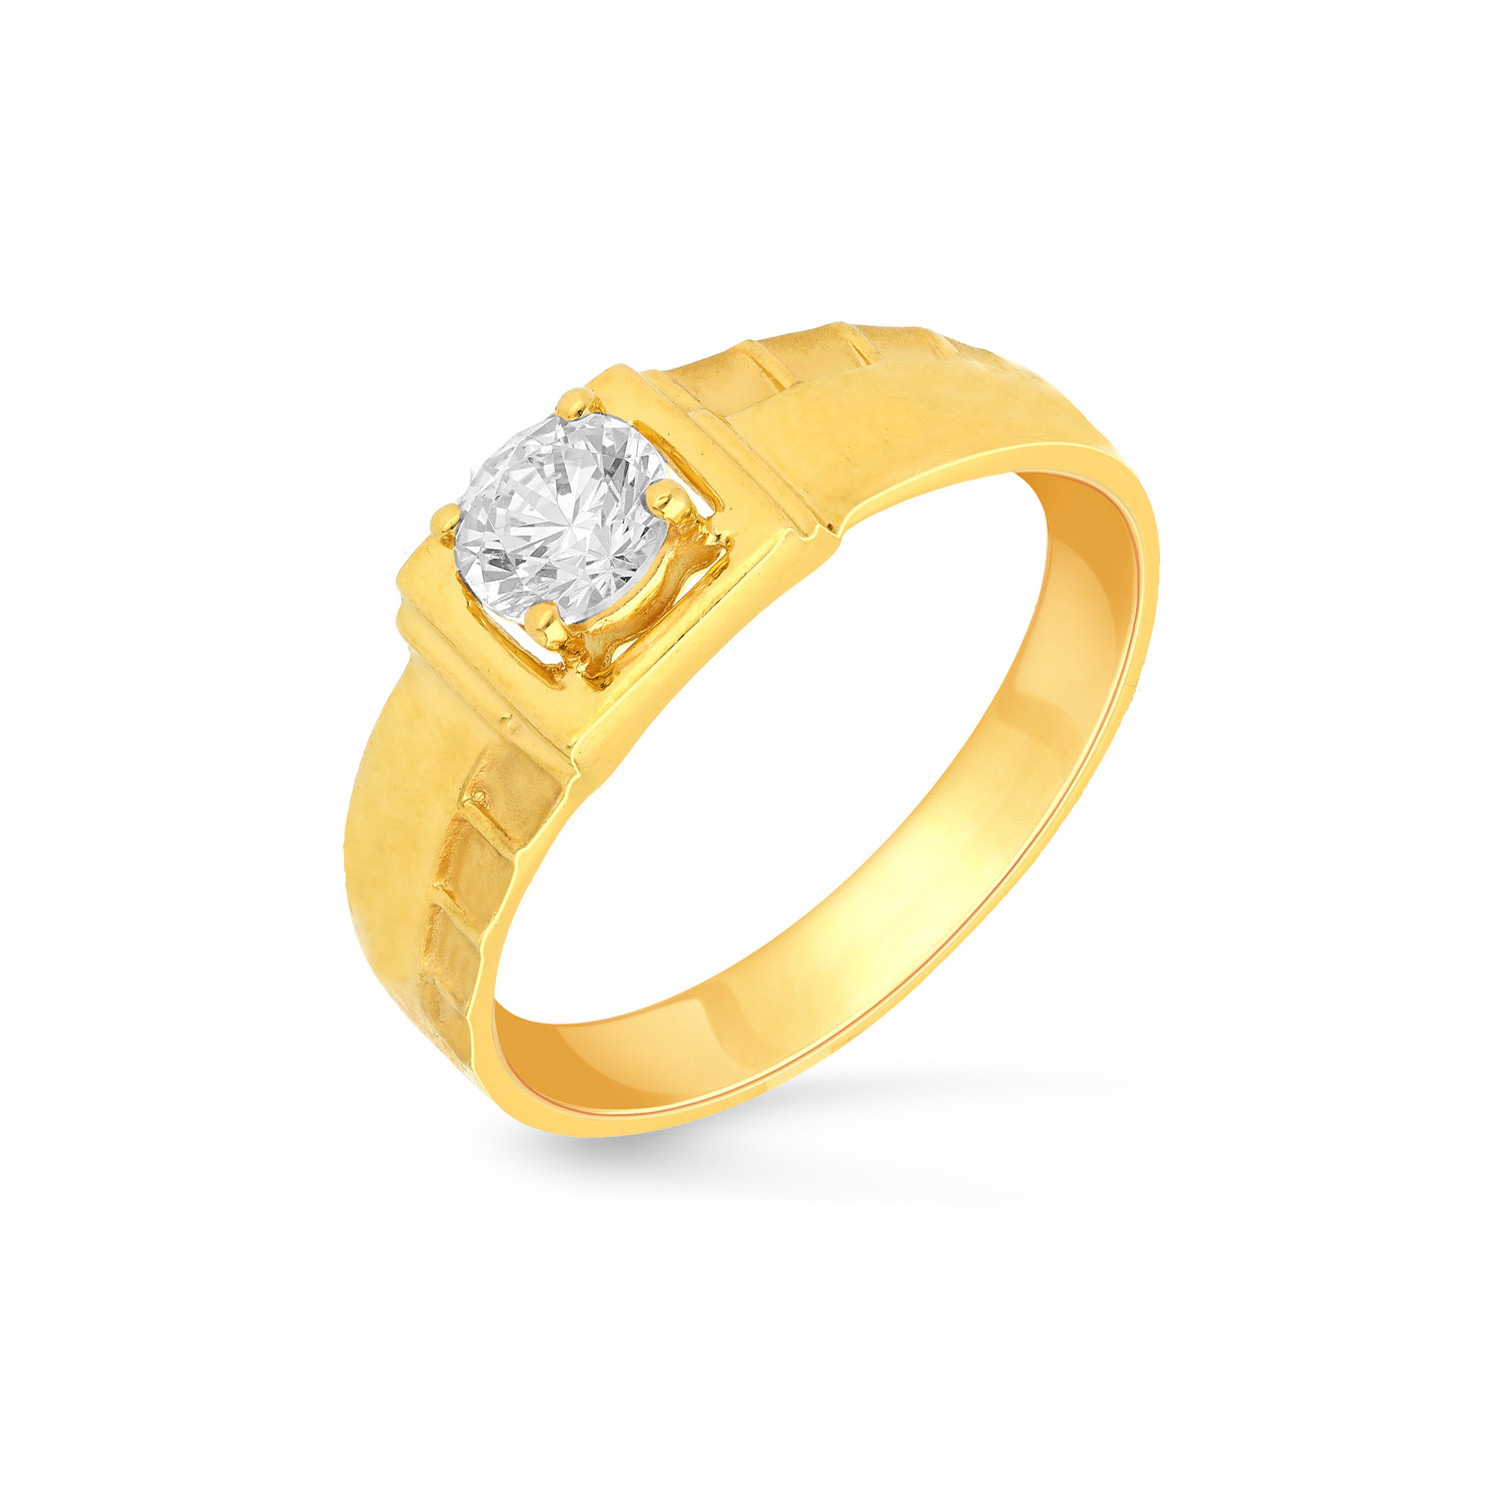 Buy Malabar Gold and Diamonds 22 KT (916) purity Yellow Gold Malabar Gold  Ring SKYFRDZ091_Y_11 for Women at Amazon.in